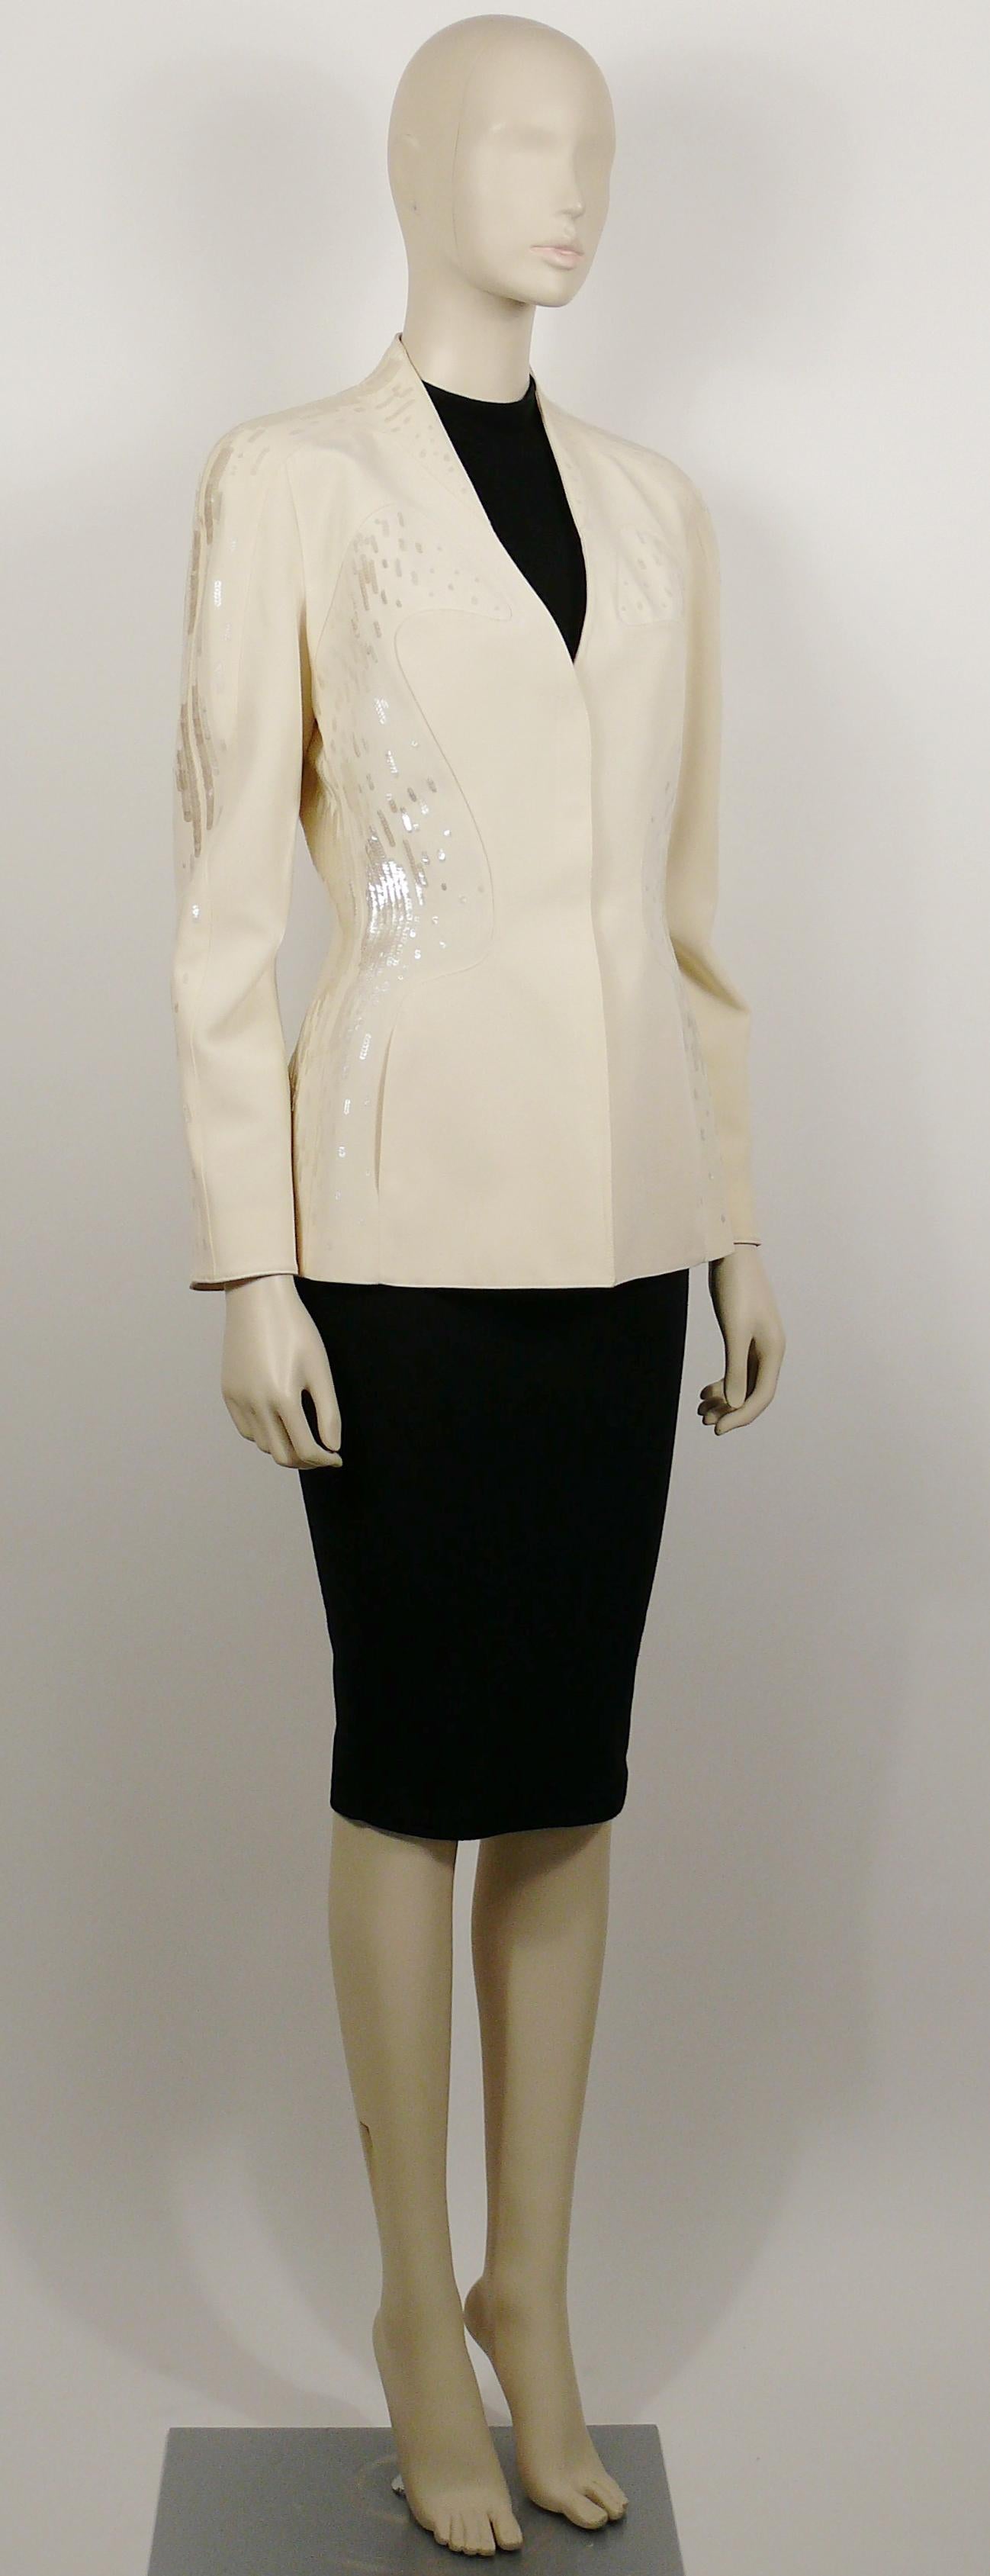 THIERRY MUGLER COUTURE vintage off white sequined jacket.

Hidden snap button down front closure.
Two side pockets.
Fully lined.
Shoulder pads.


Label reads THIERRY MUGLER COUTURE.
Made in France.

Size tag reads : 38.
Please check